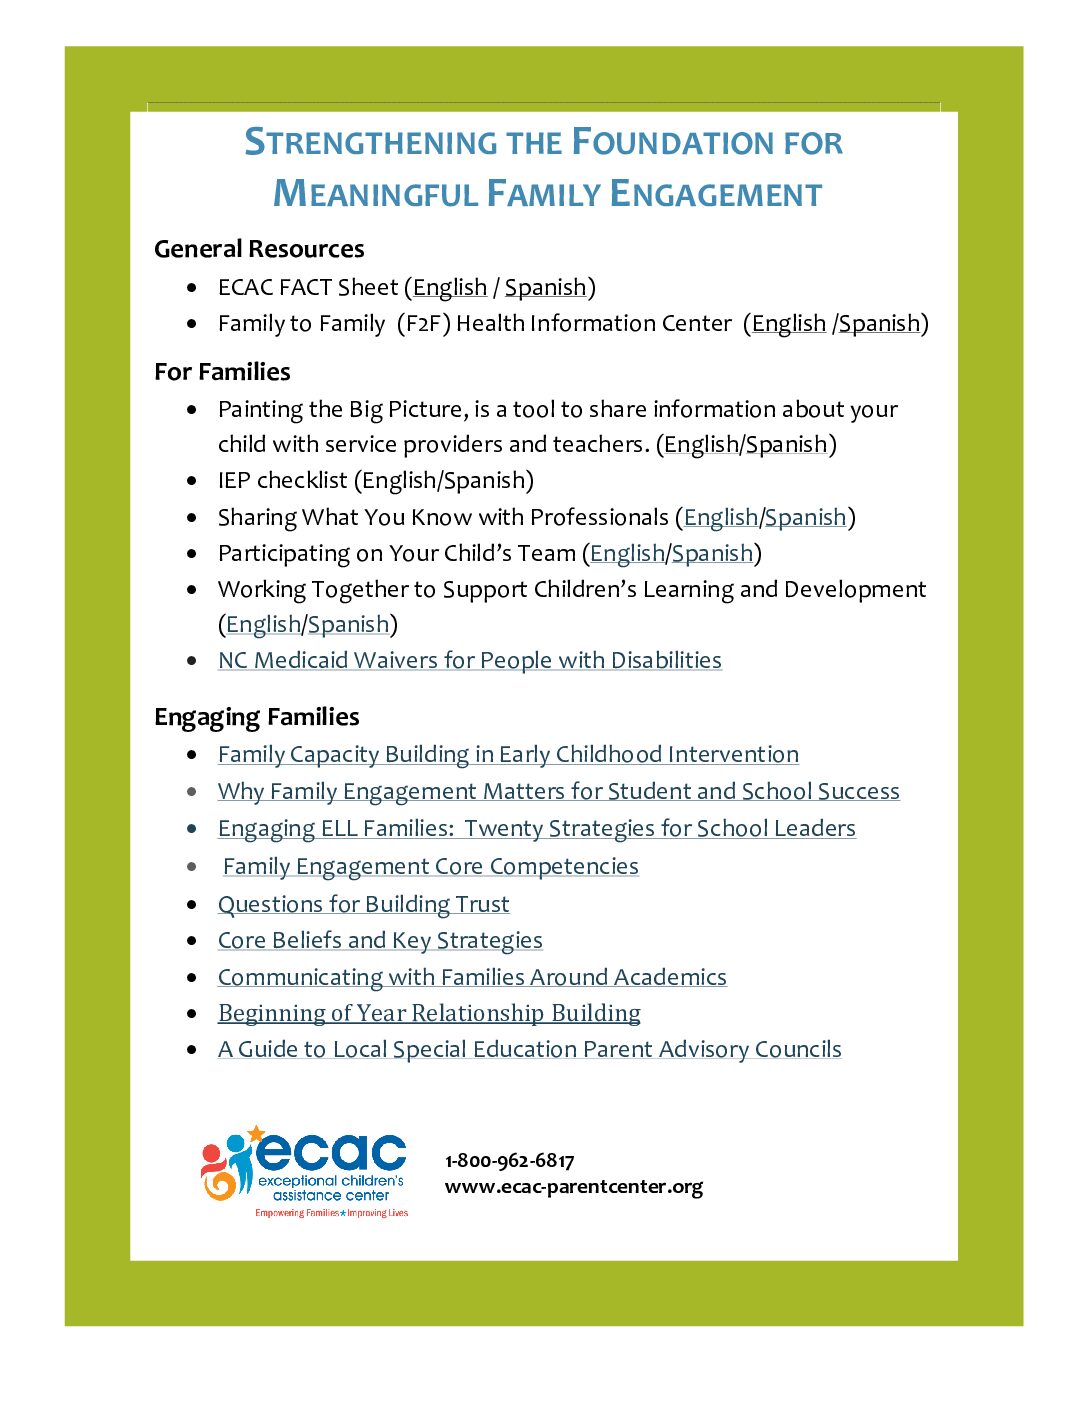 Strengthening the Foundation for Effective Family Engagement